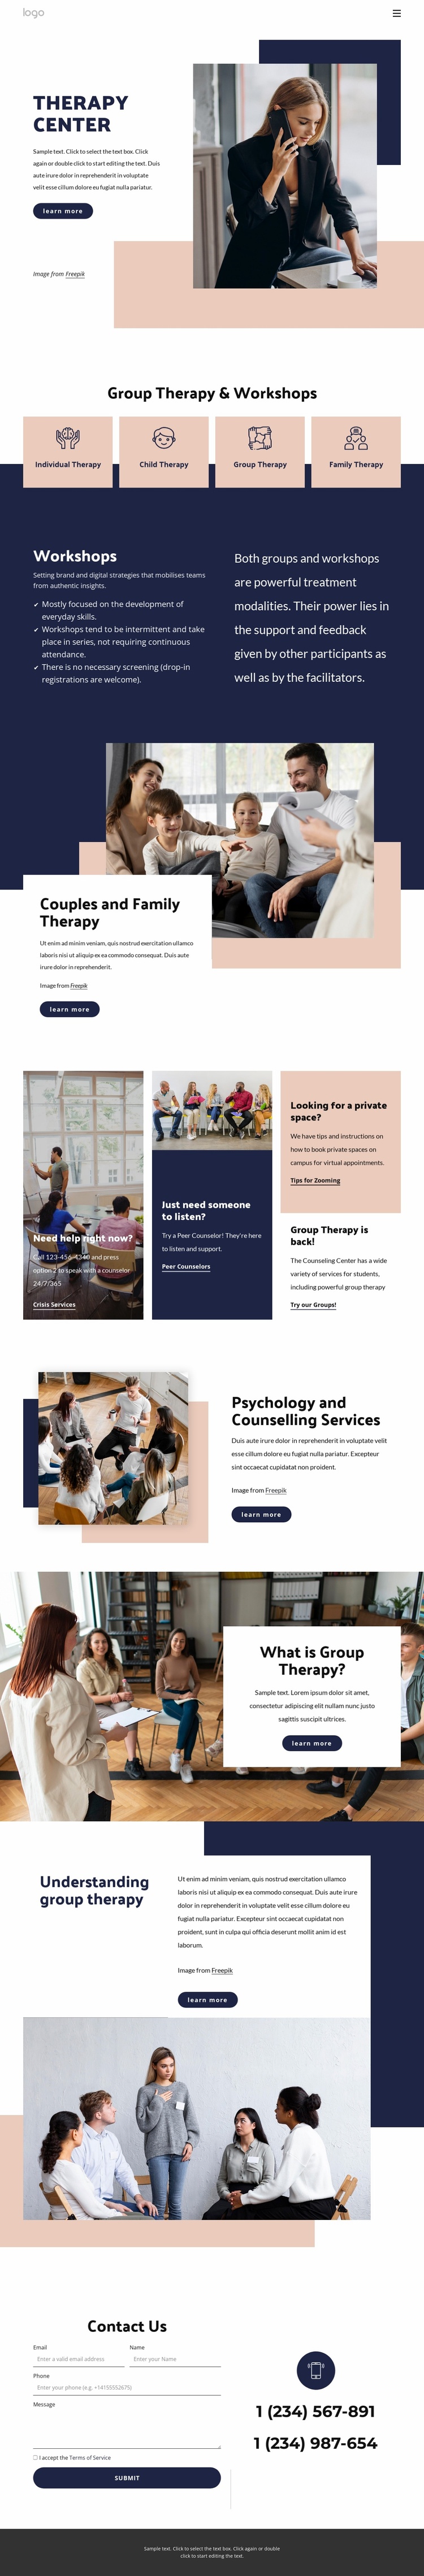 Therapy center eCommerce Template